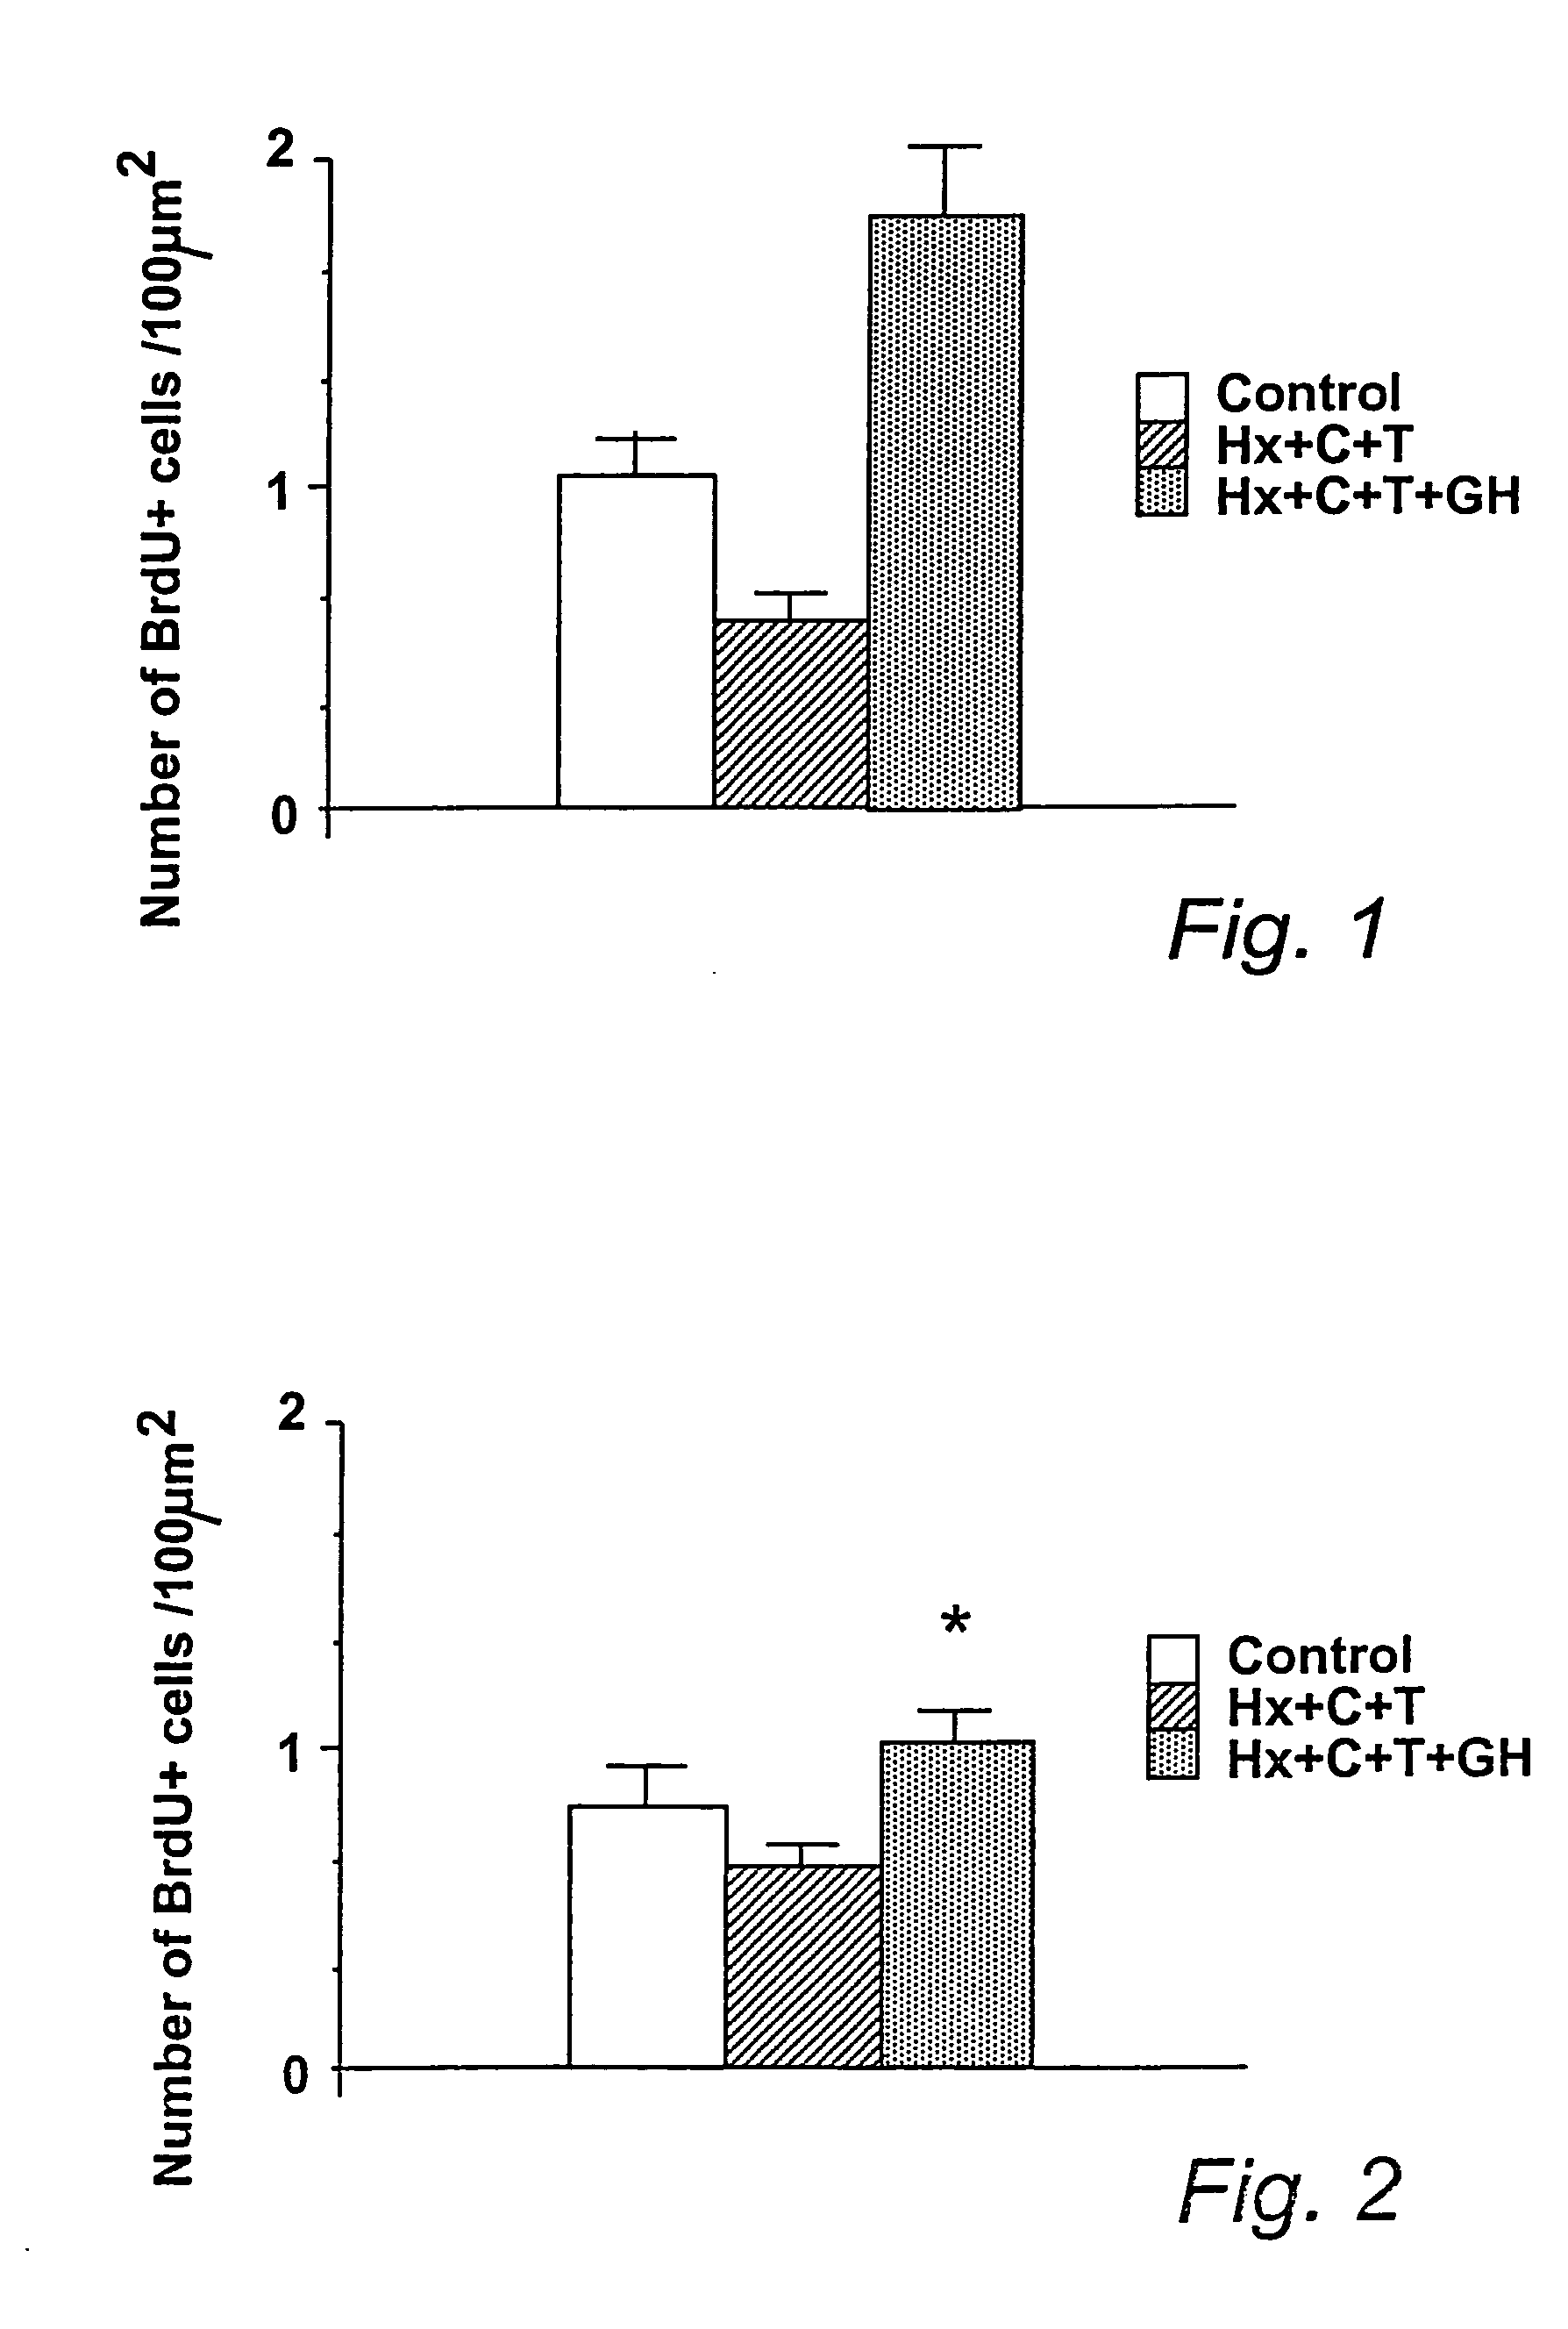 Medicinal product and method for treatment of conditions affecting neural stem cells or progenitor cells